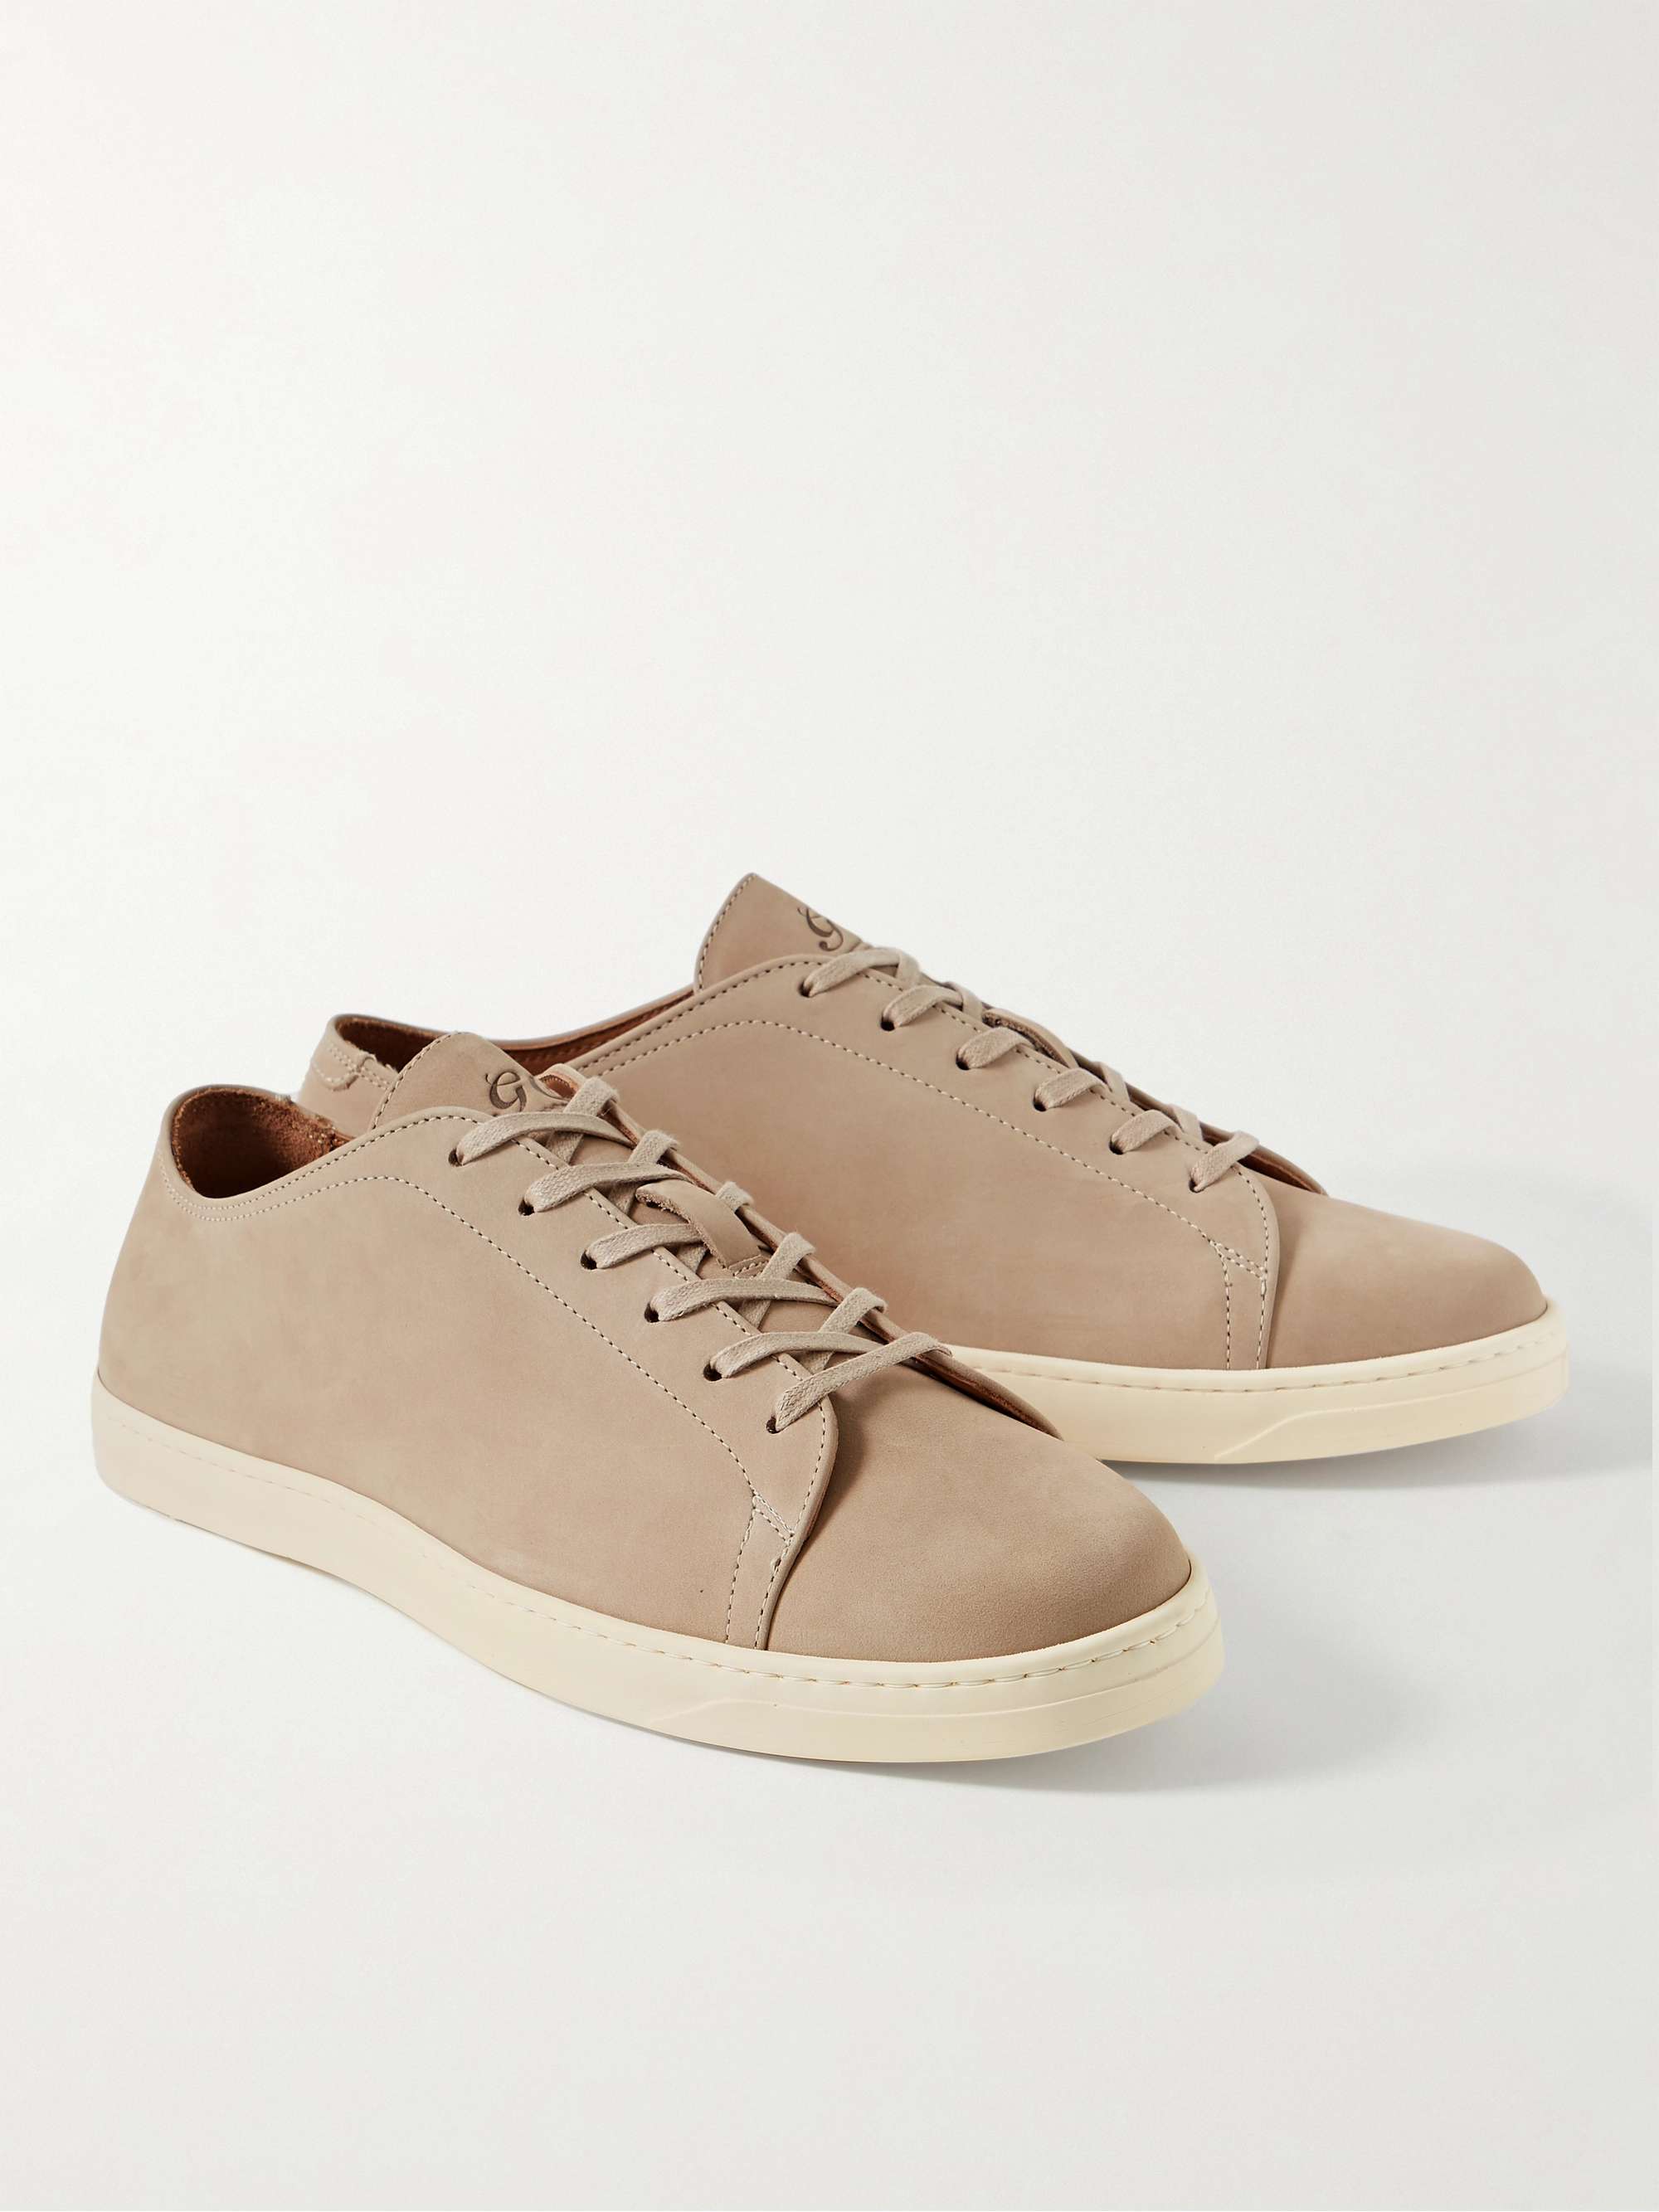 GEORGE CLEVERLEY Leather Sneakers